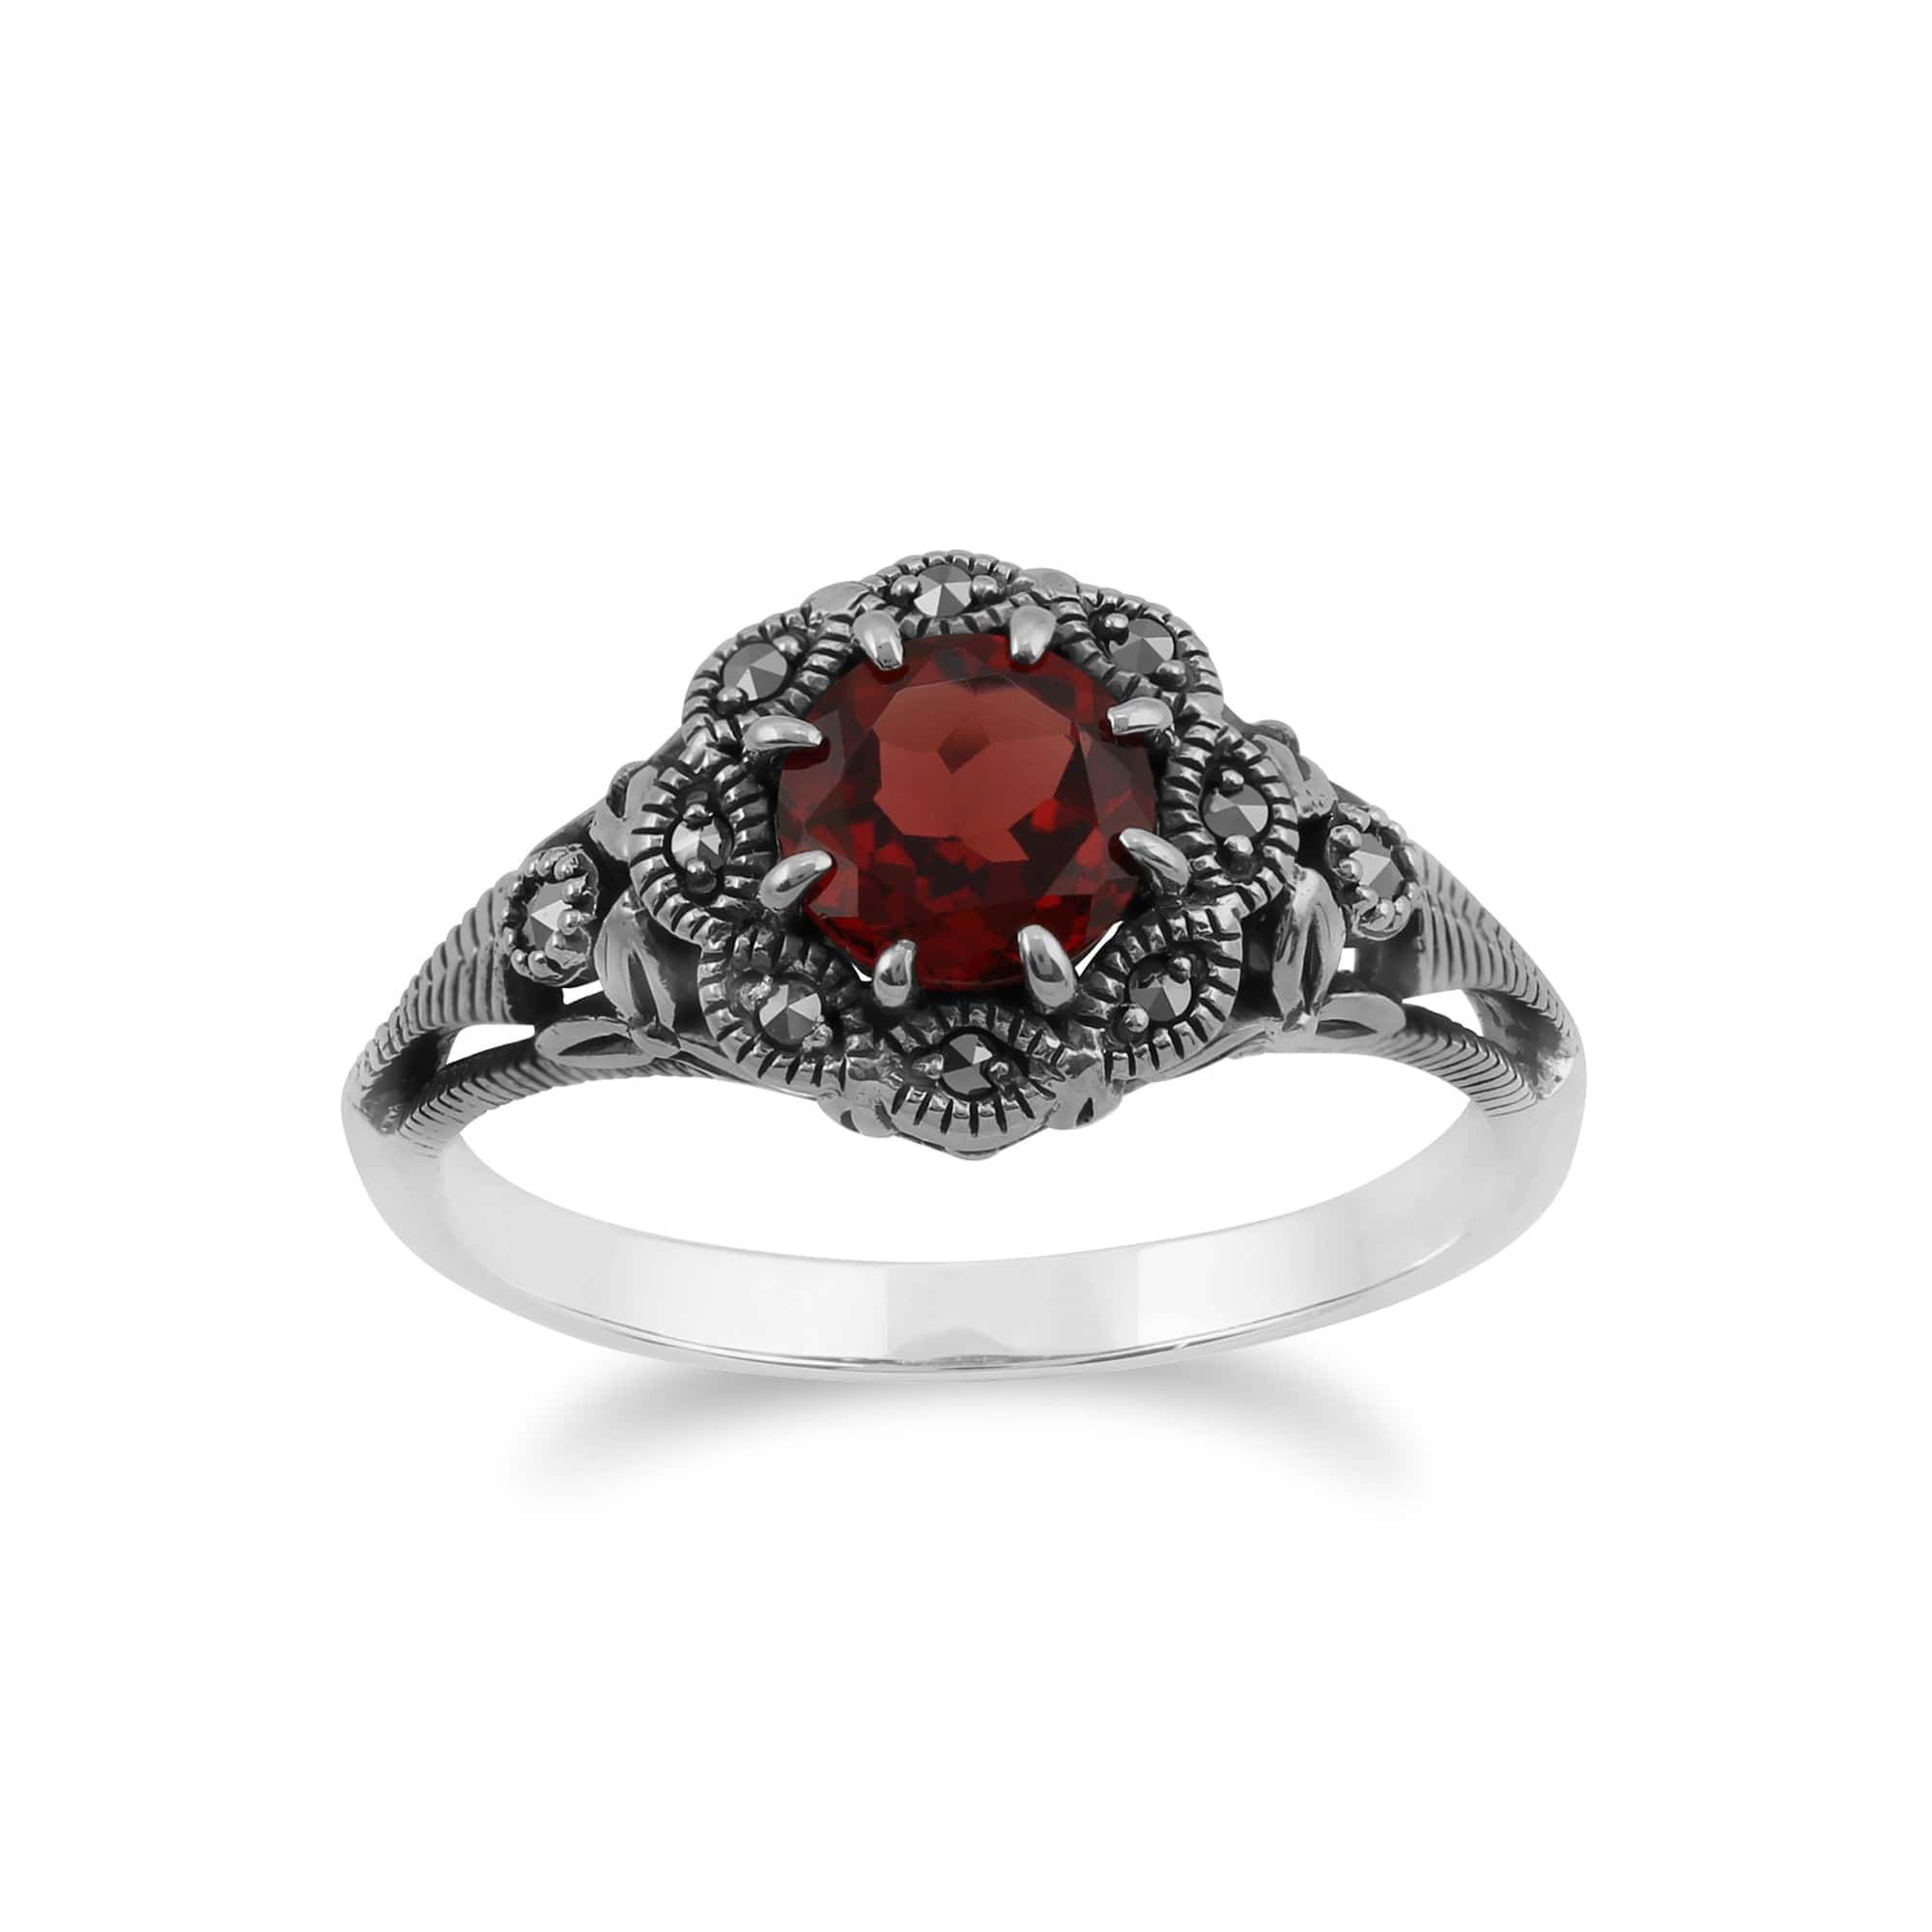 Art Nouveau Style Round Garnet & Marcasite Floral Ring in 925 Sterling Silver